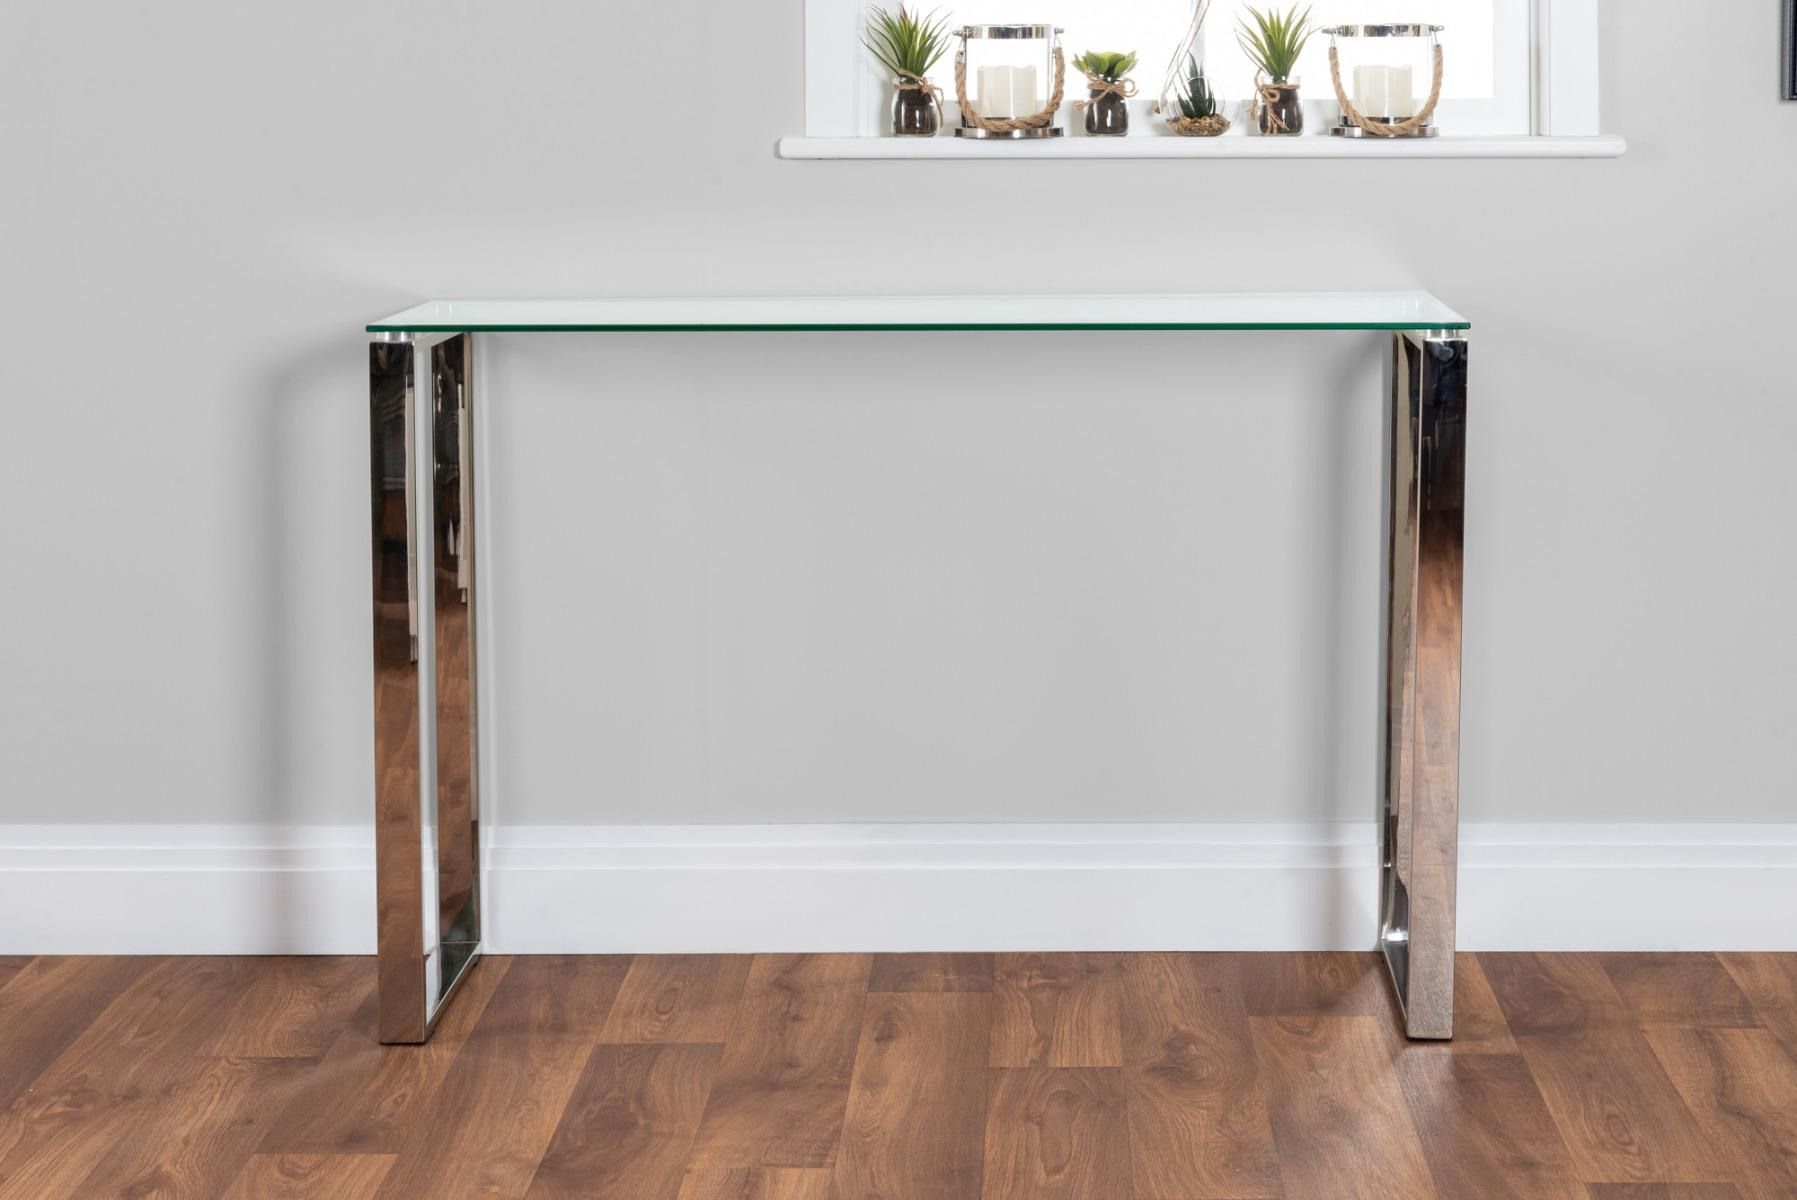 Modern Glass & Chrome Console Table | Furniturebox With Regard To Chrome And Glass Rectangular Console Tables (View 12 of 20)